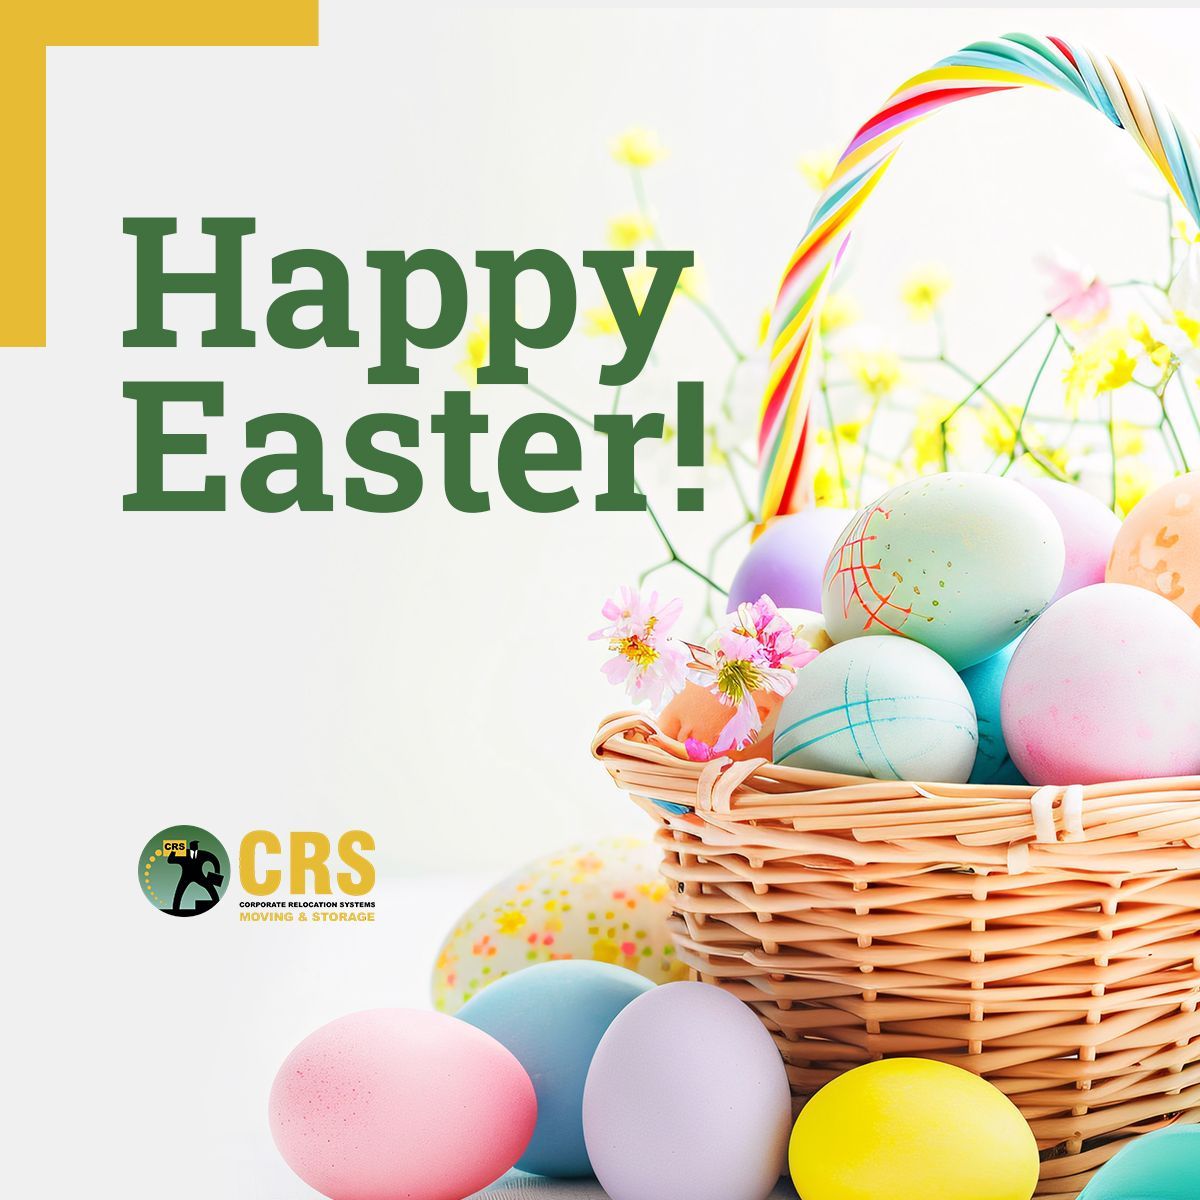 Happy Easter from CRS Moving & Storage💐🐣🐰 

#HappyEaster #OfficeLiquidation #OfficeStorage #OfficeMove #NYCMovers #CorporateMovers #NYCBusinessMovers #NYC #BusinessMovers #newyorkmovers #CRSmovers #CorporateMovingCompany #Relocation #OfficeRelocation